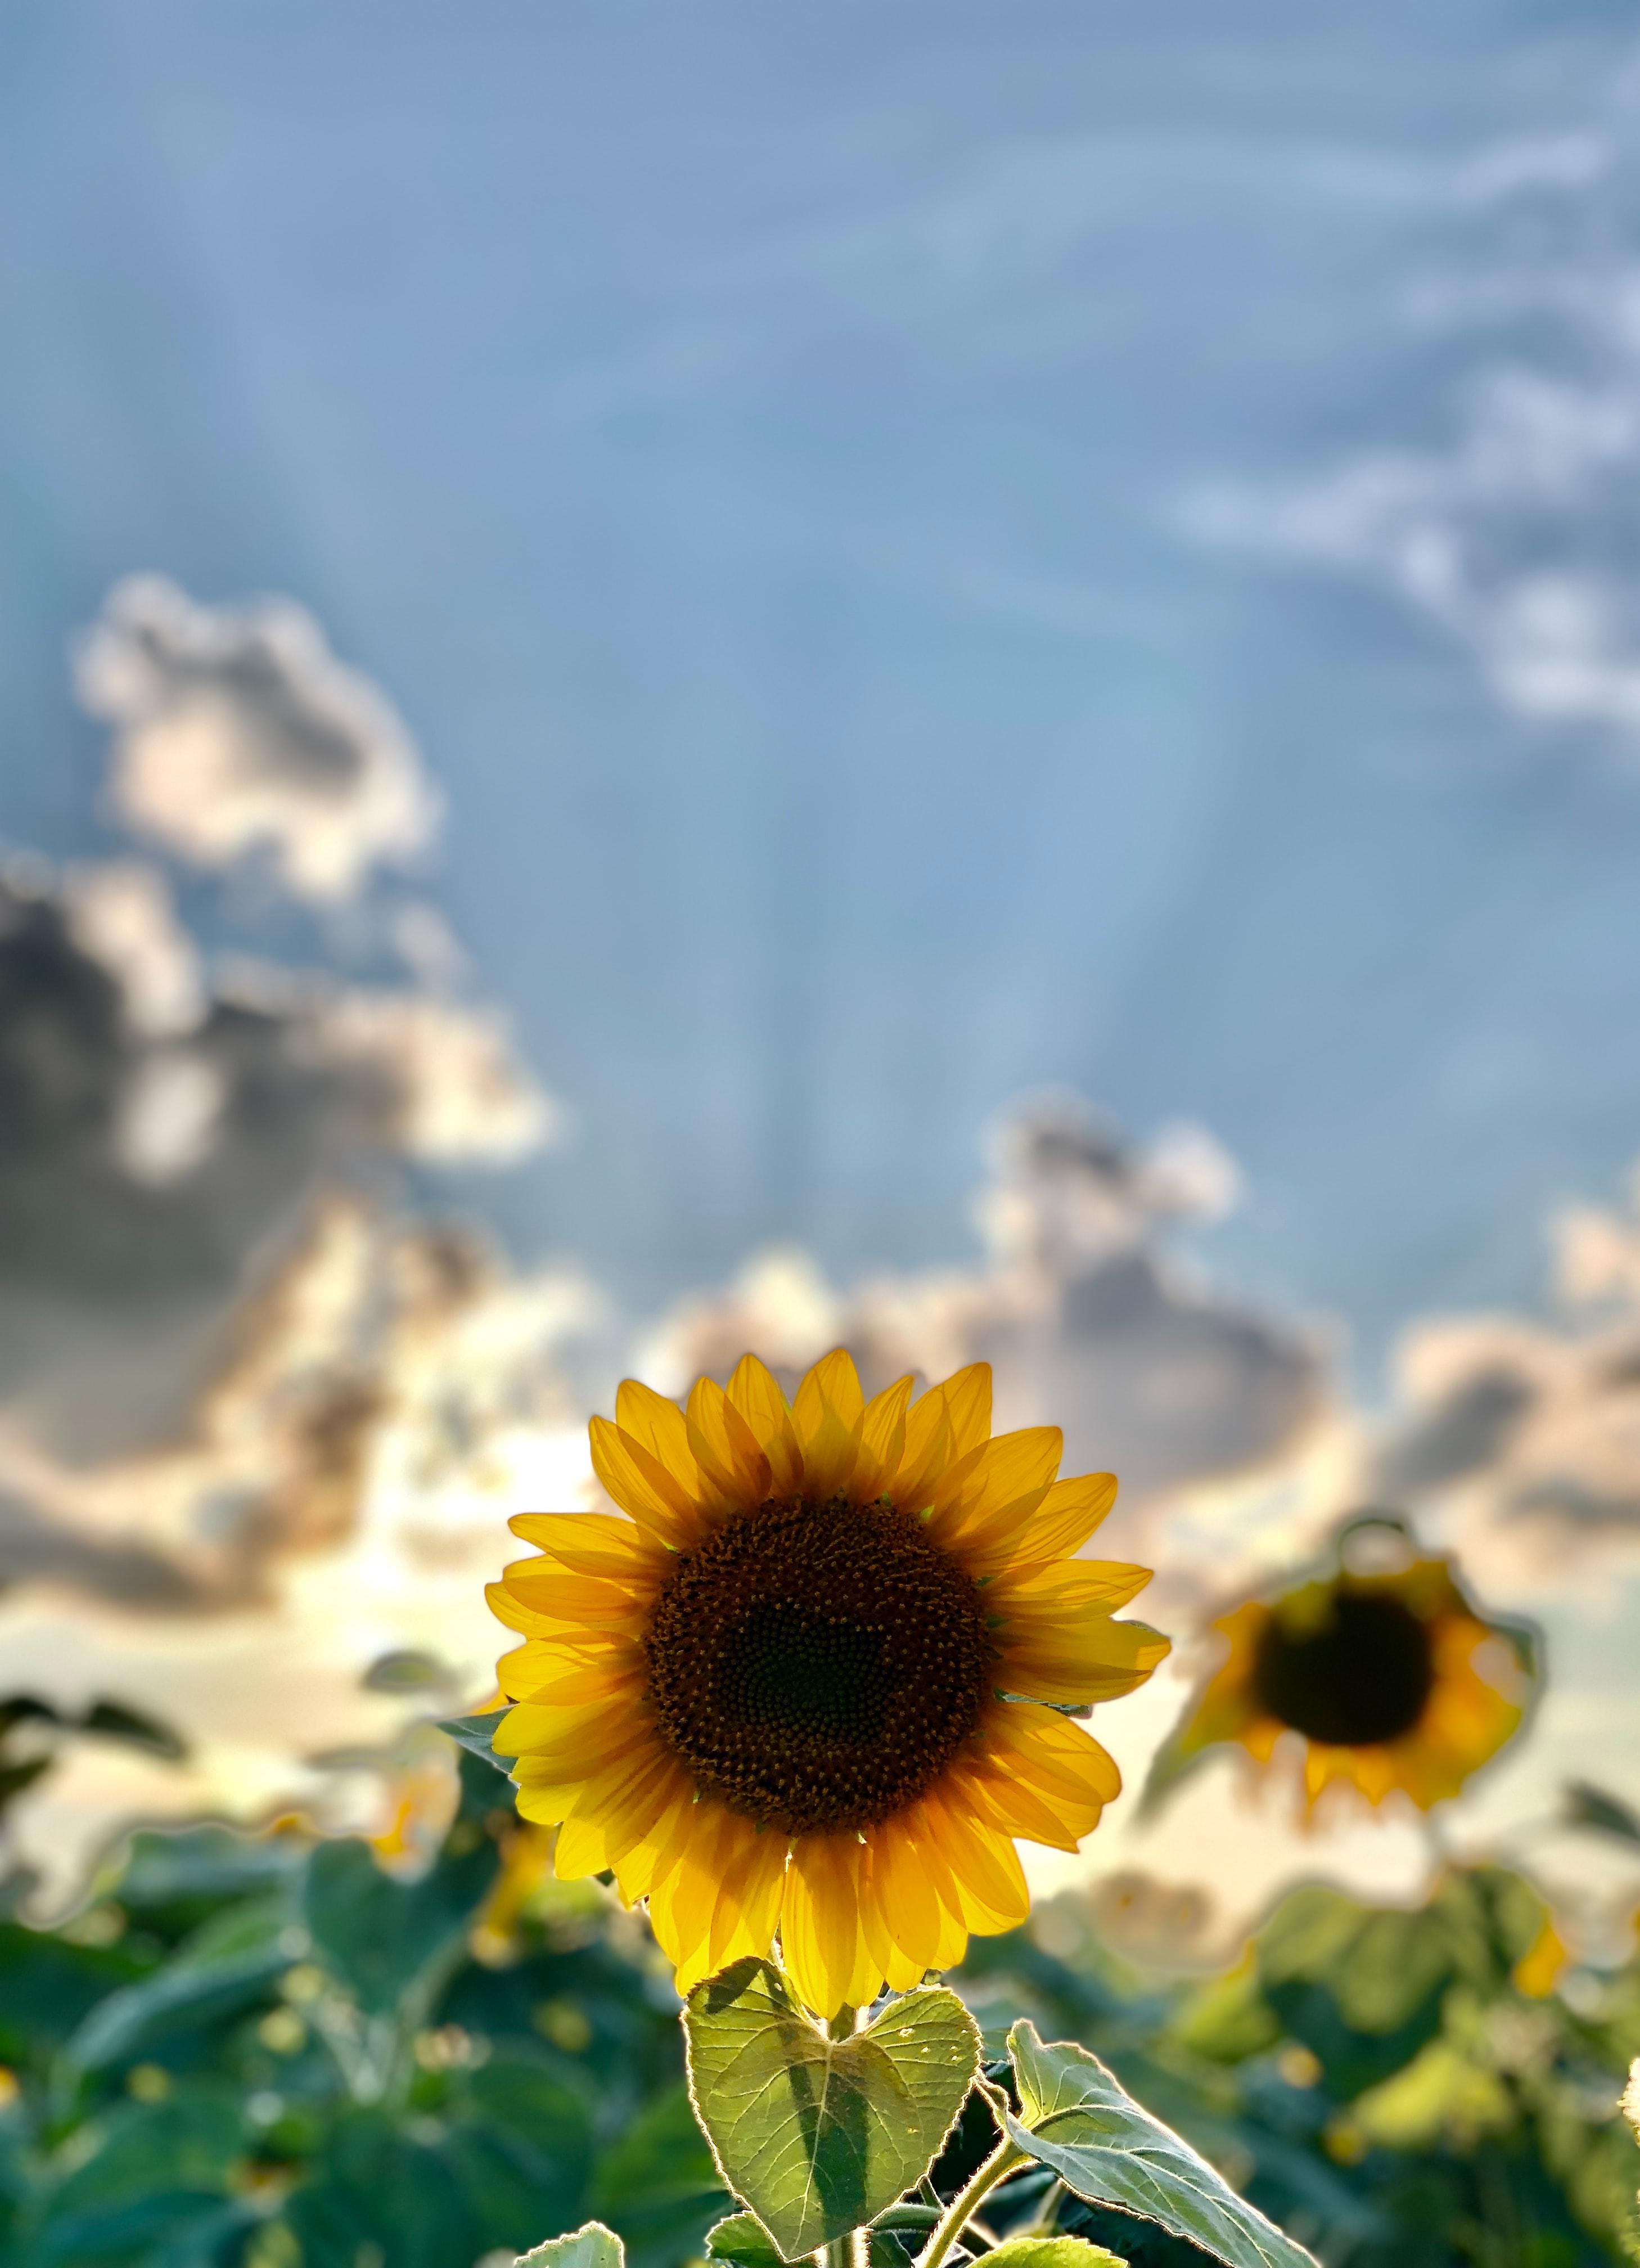 A sunflower in a field with a blue sky in the background - Sunflower